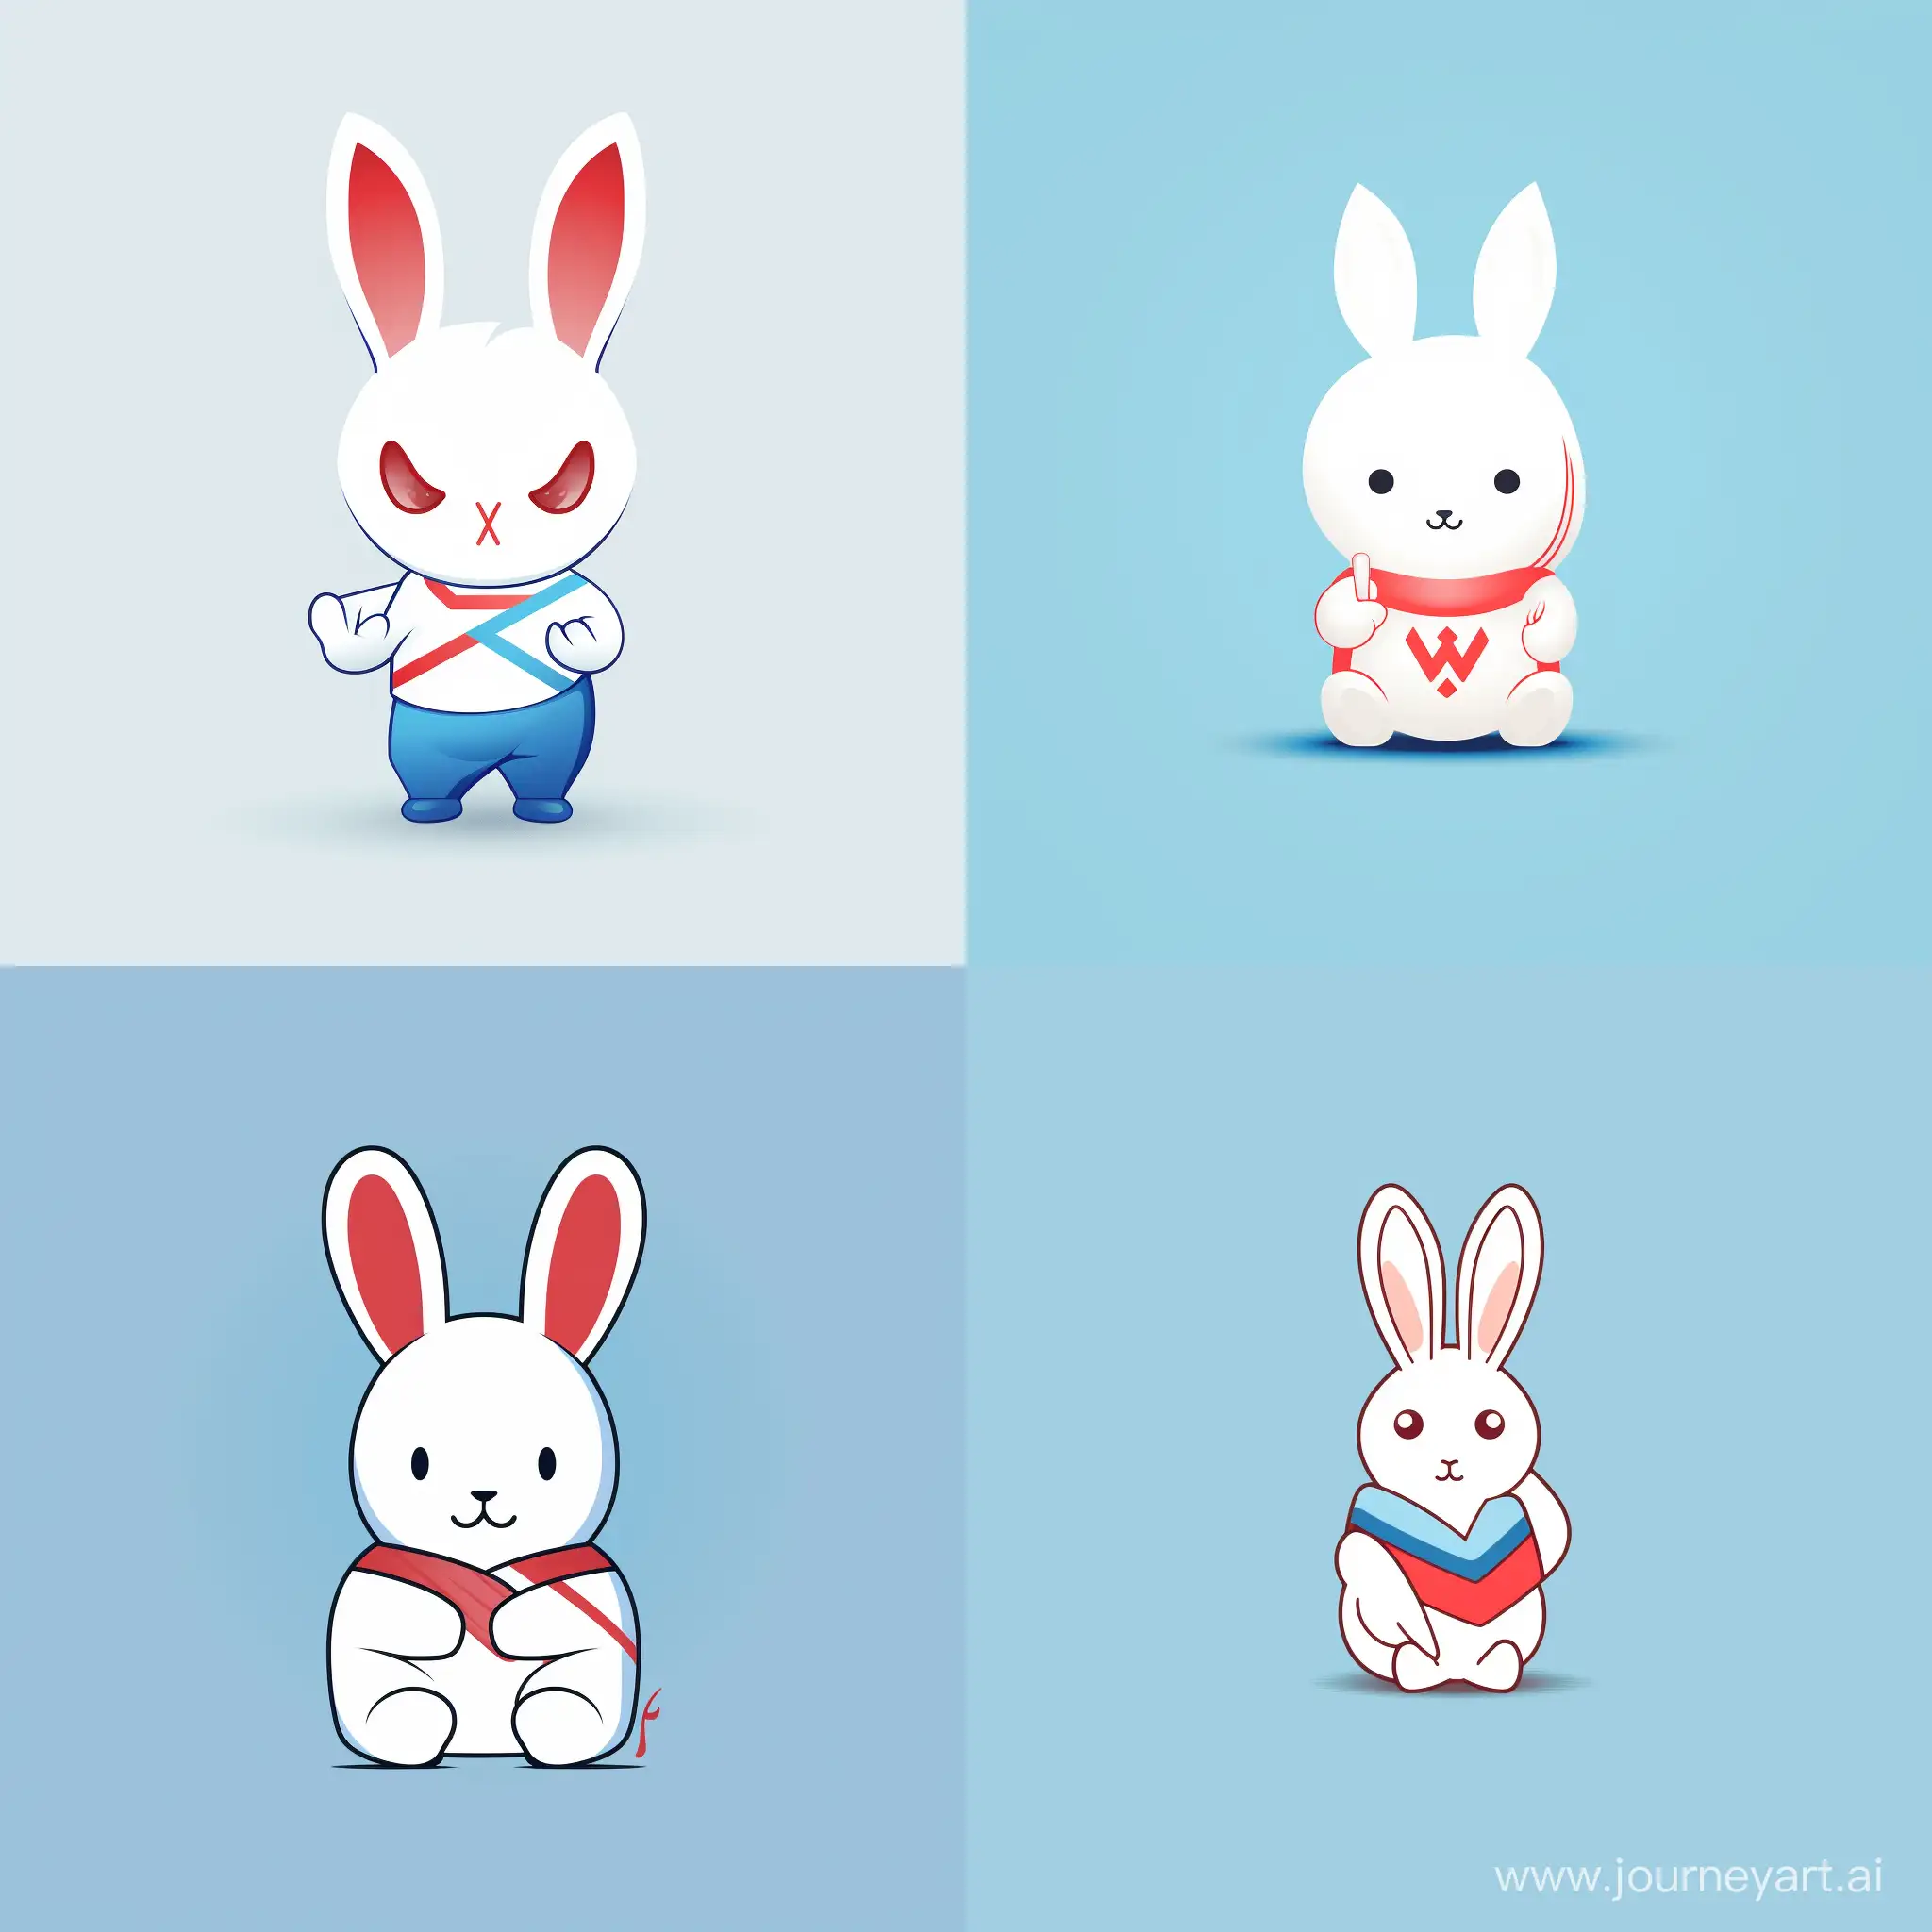 line work only, logo design illustration, minimal , japanese style, cool bunny turns around and holding V sign, light blue line and light red line, no filling colour